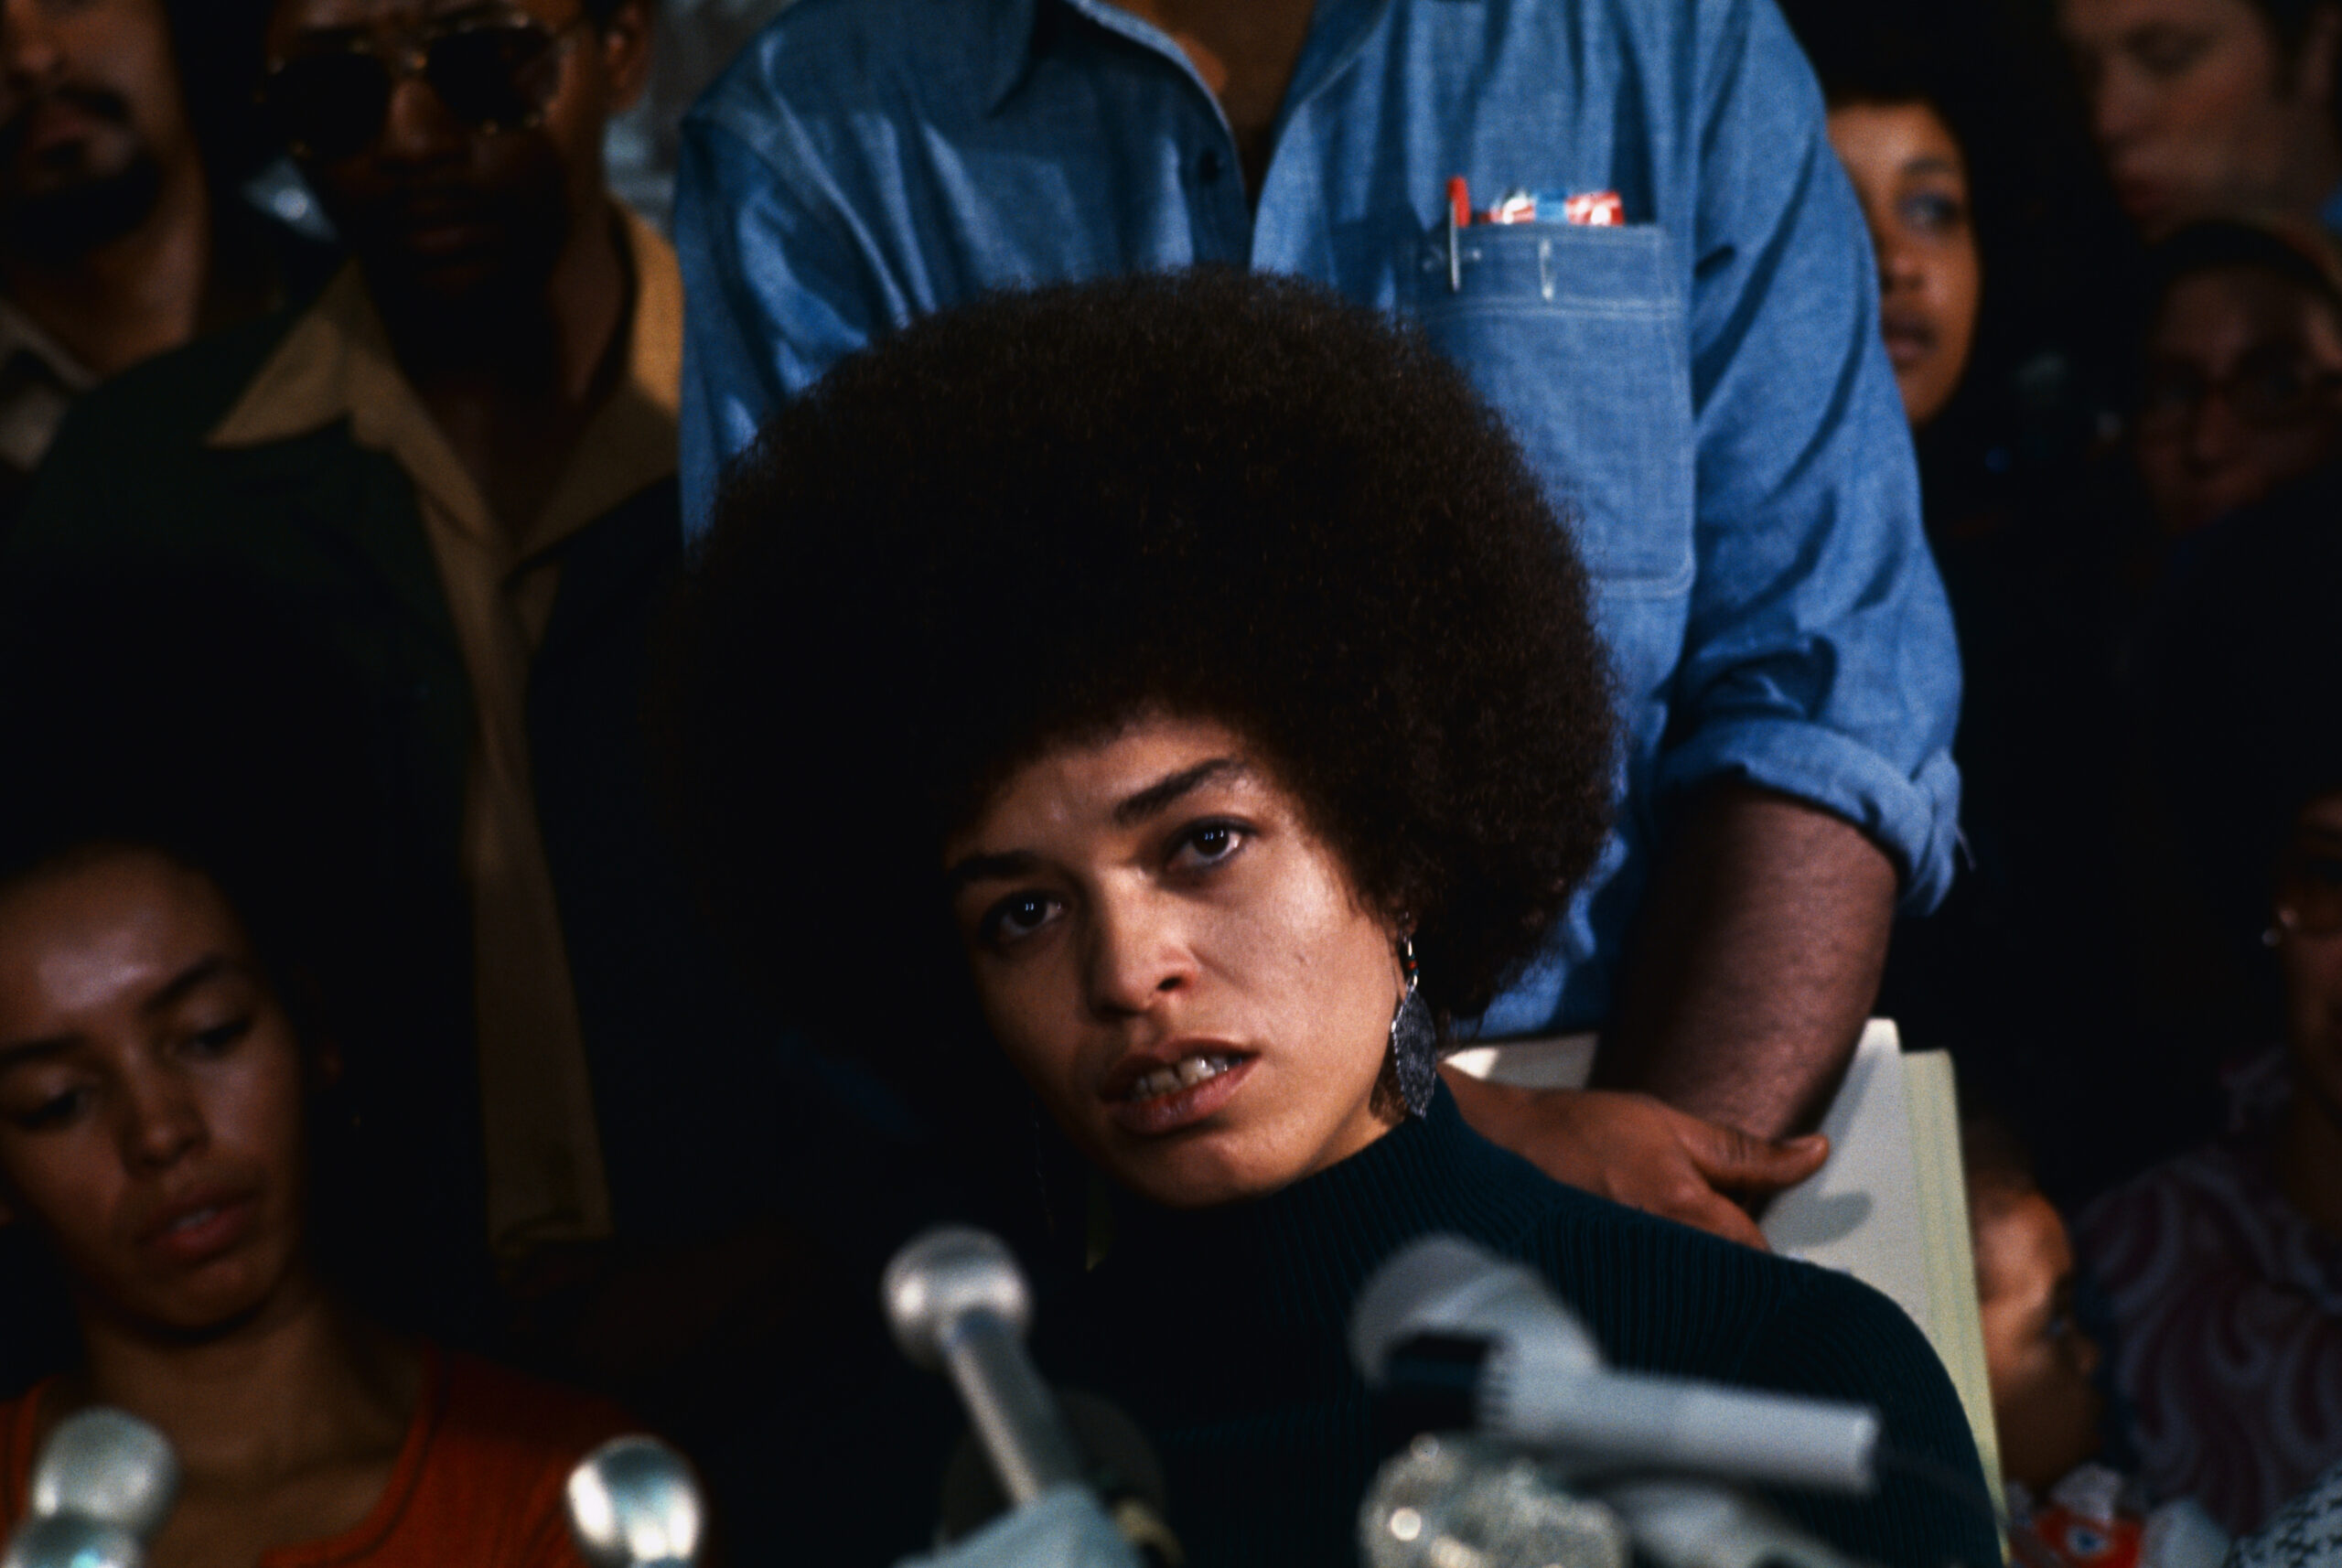 Photography’s Role In The Black Power Movement